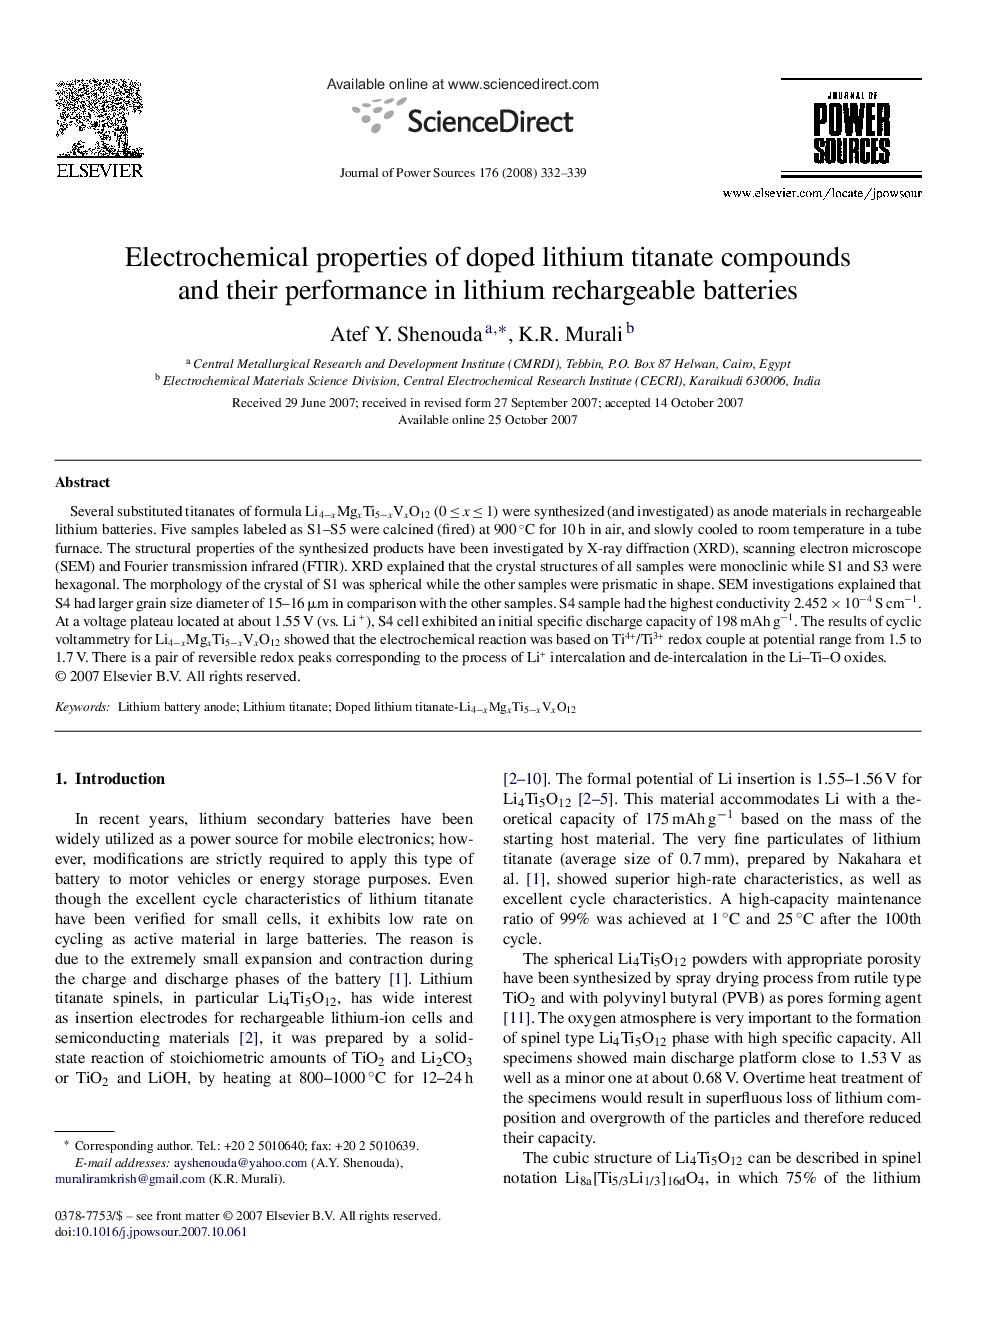 Electrochemical properties of doped lithium titanate compounds and their performance in lithium rechargeable batteries